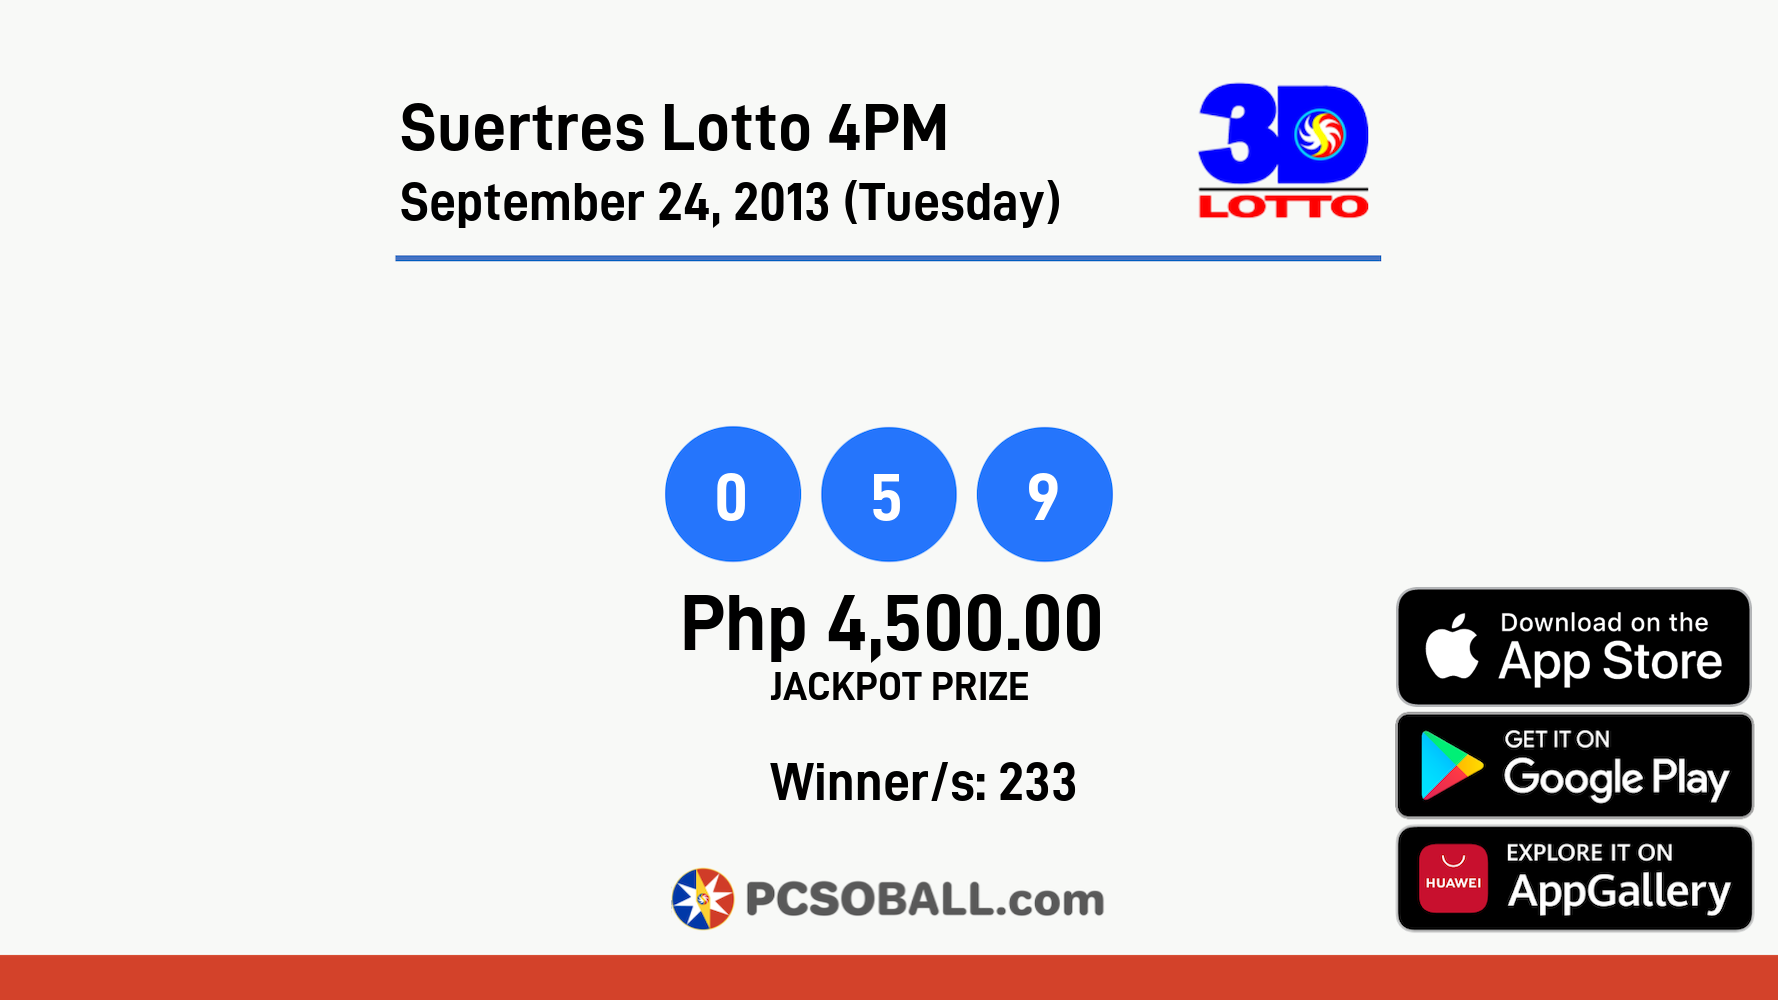 Suertres Lotto 4PM September 24, 2013 (Tuesday) Result